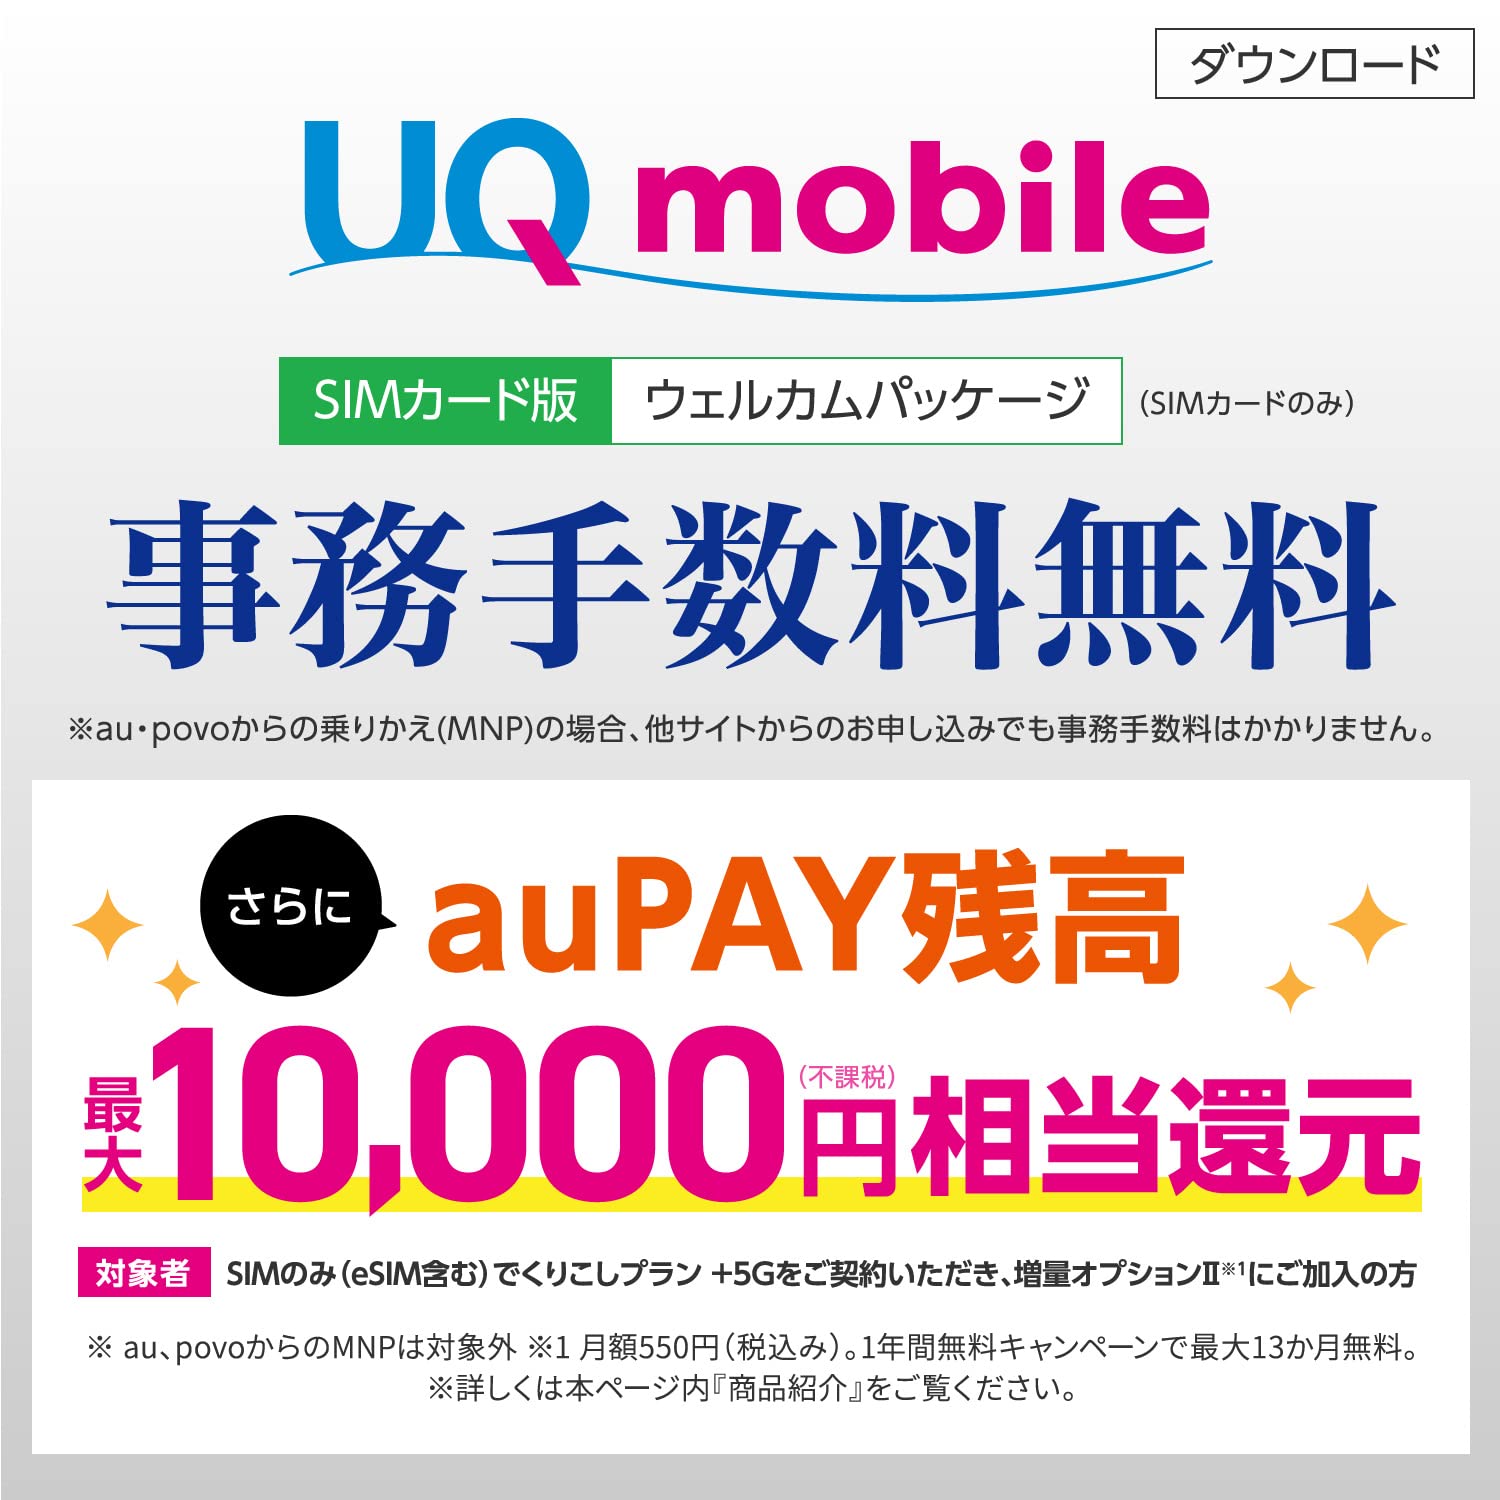 Mua Dl Version Office Fee 3 300 Yen Free Uq Mobile Welcome Package Sim Card Only Cheap Sim Au Line Supported Iphone Android Compatible Tren Amazon Nhật Chinh Hang 22 Fado